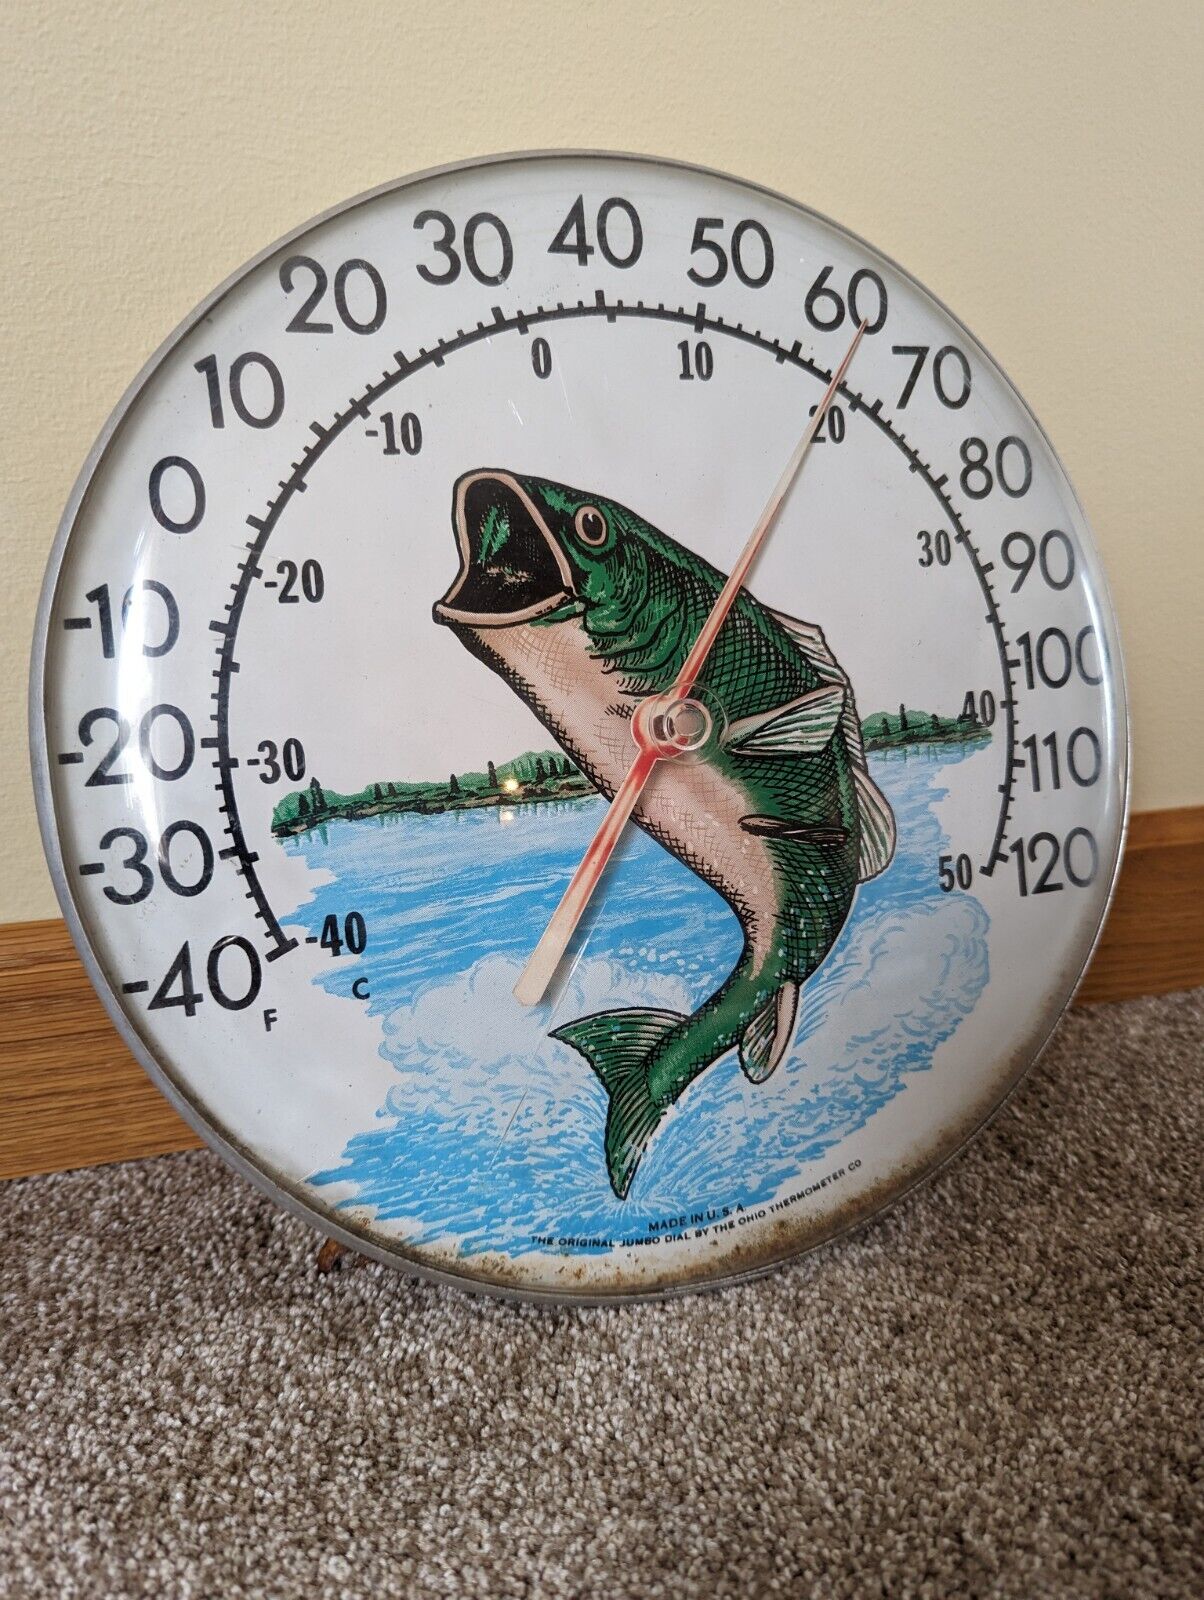 The Original Jumbo Dial Ohio Thermometer Co Bass Trout Fish 12